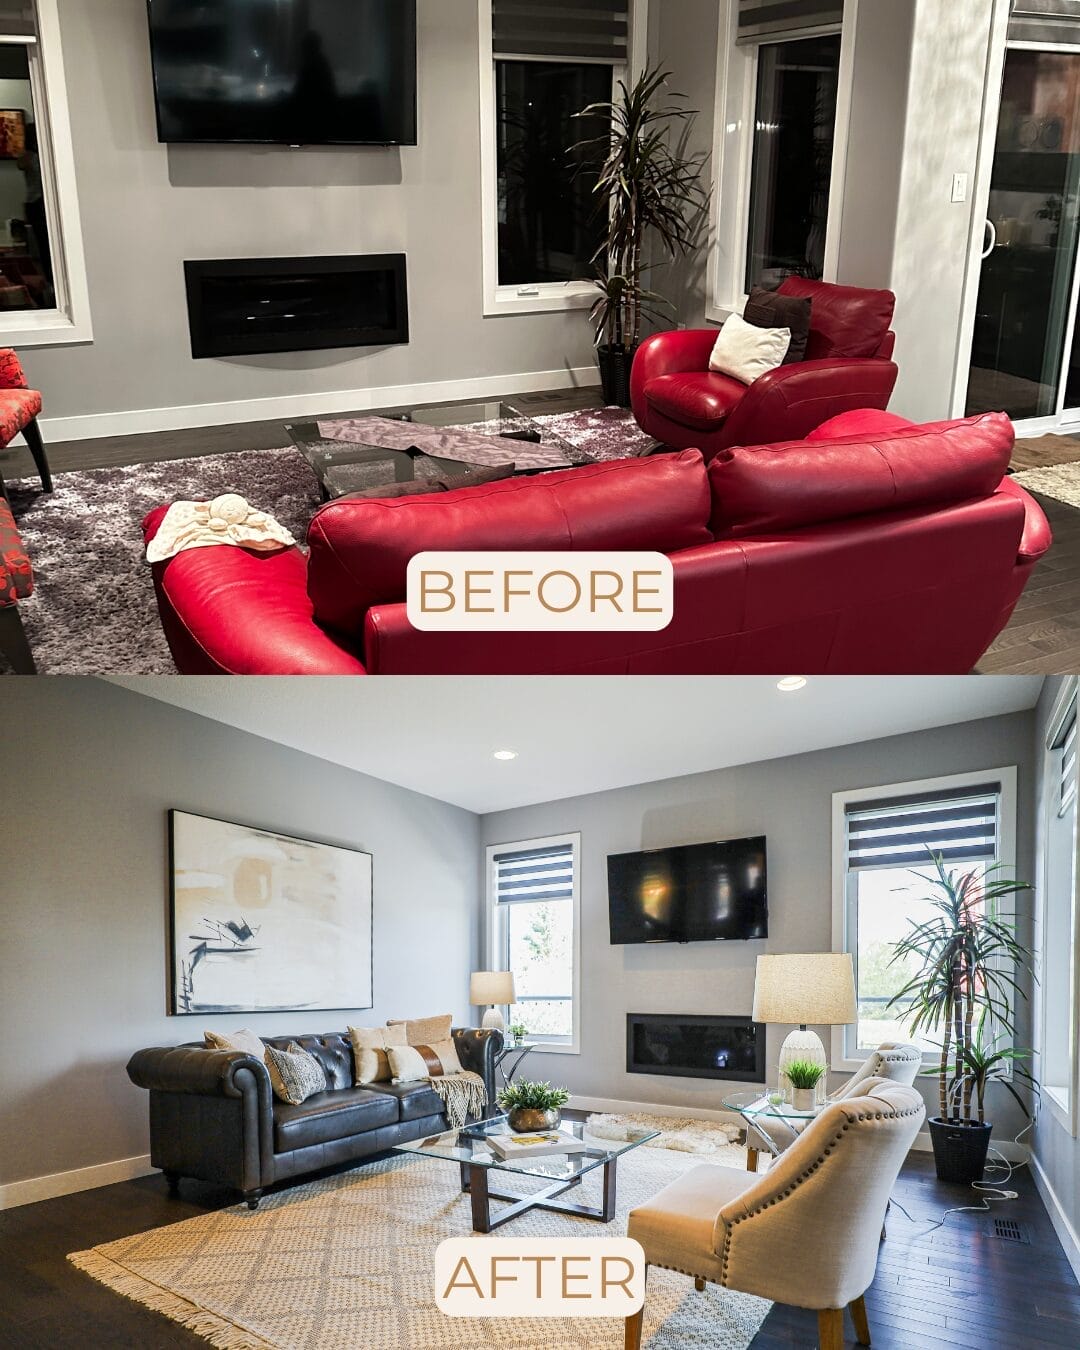 redesign before-after